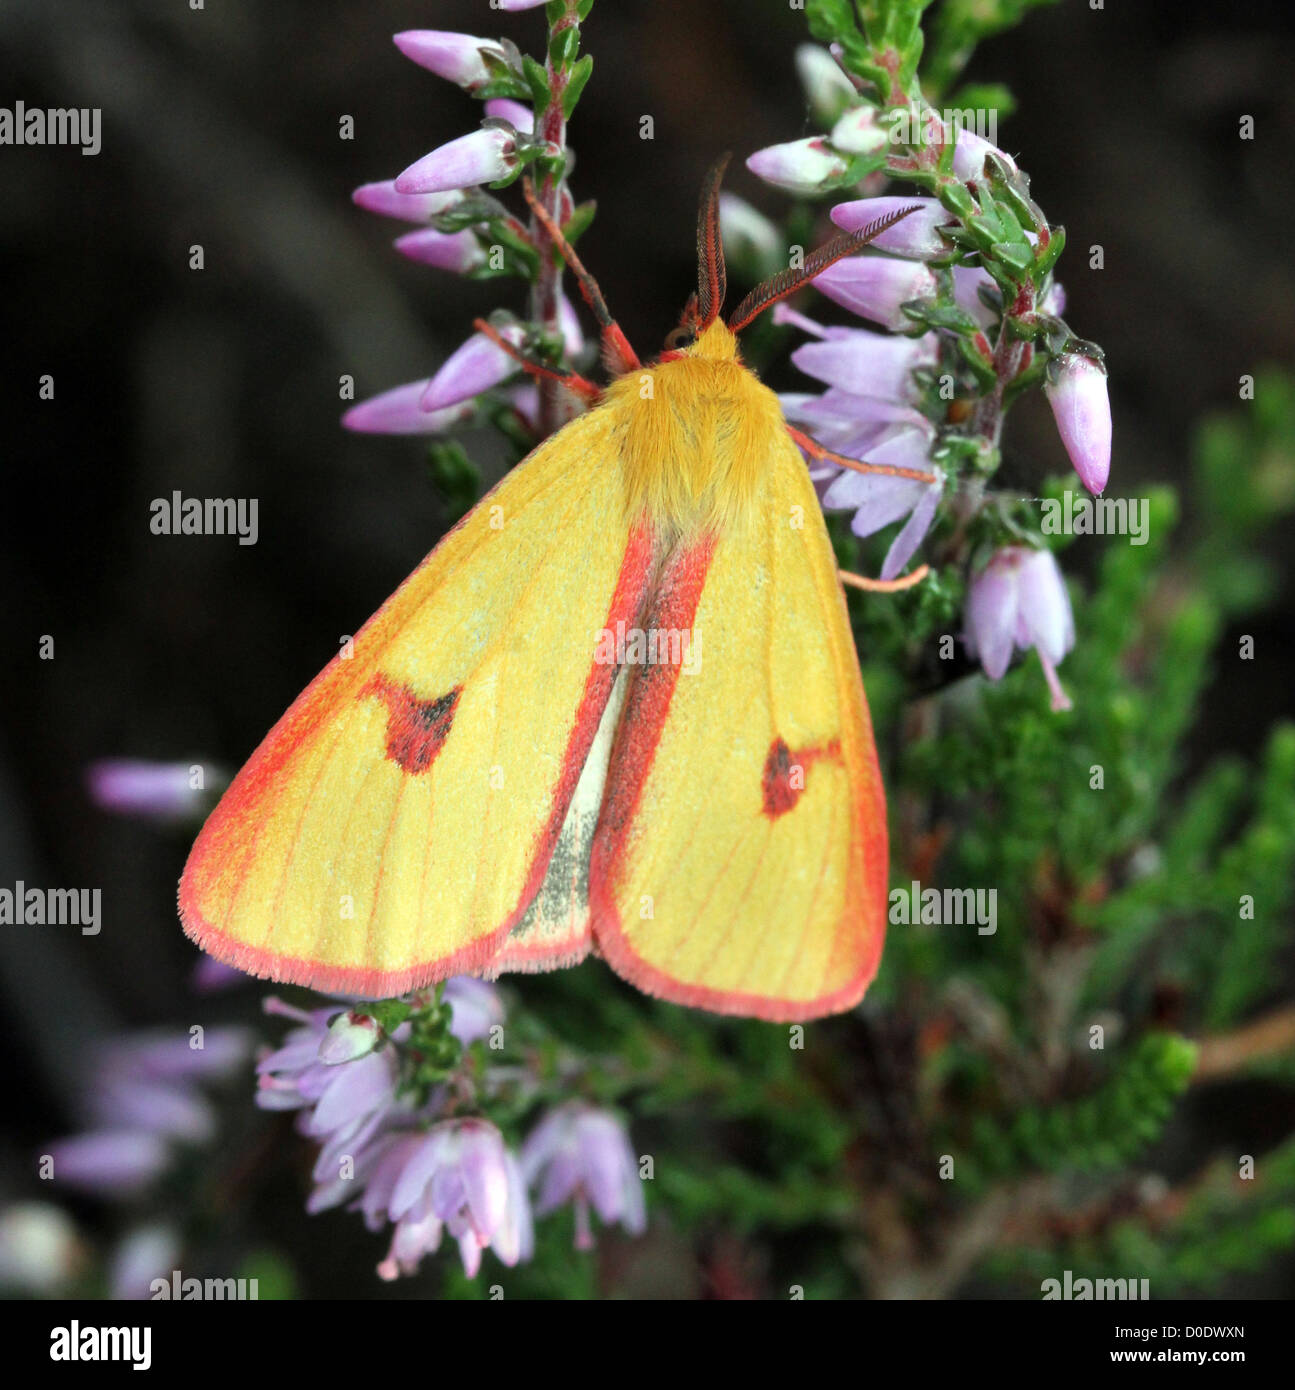 Male yellow Clouded Buff moth (Diacrisia sannio) foraging on Cross-leaved heath (Erica tetralix)  - 12 images in series Stock Photo